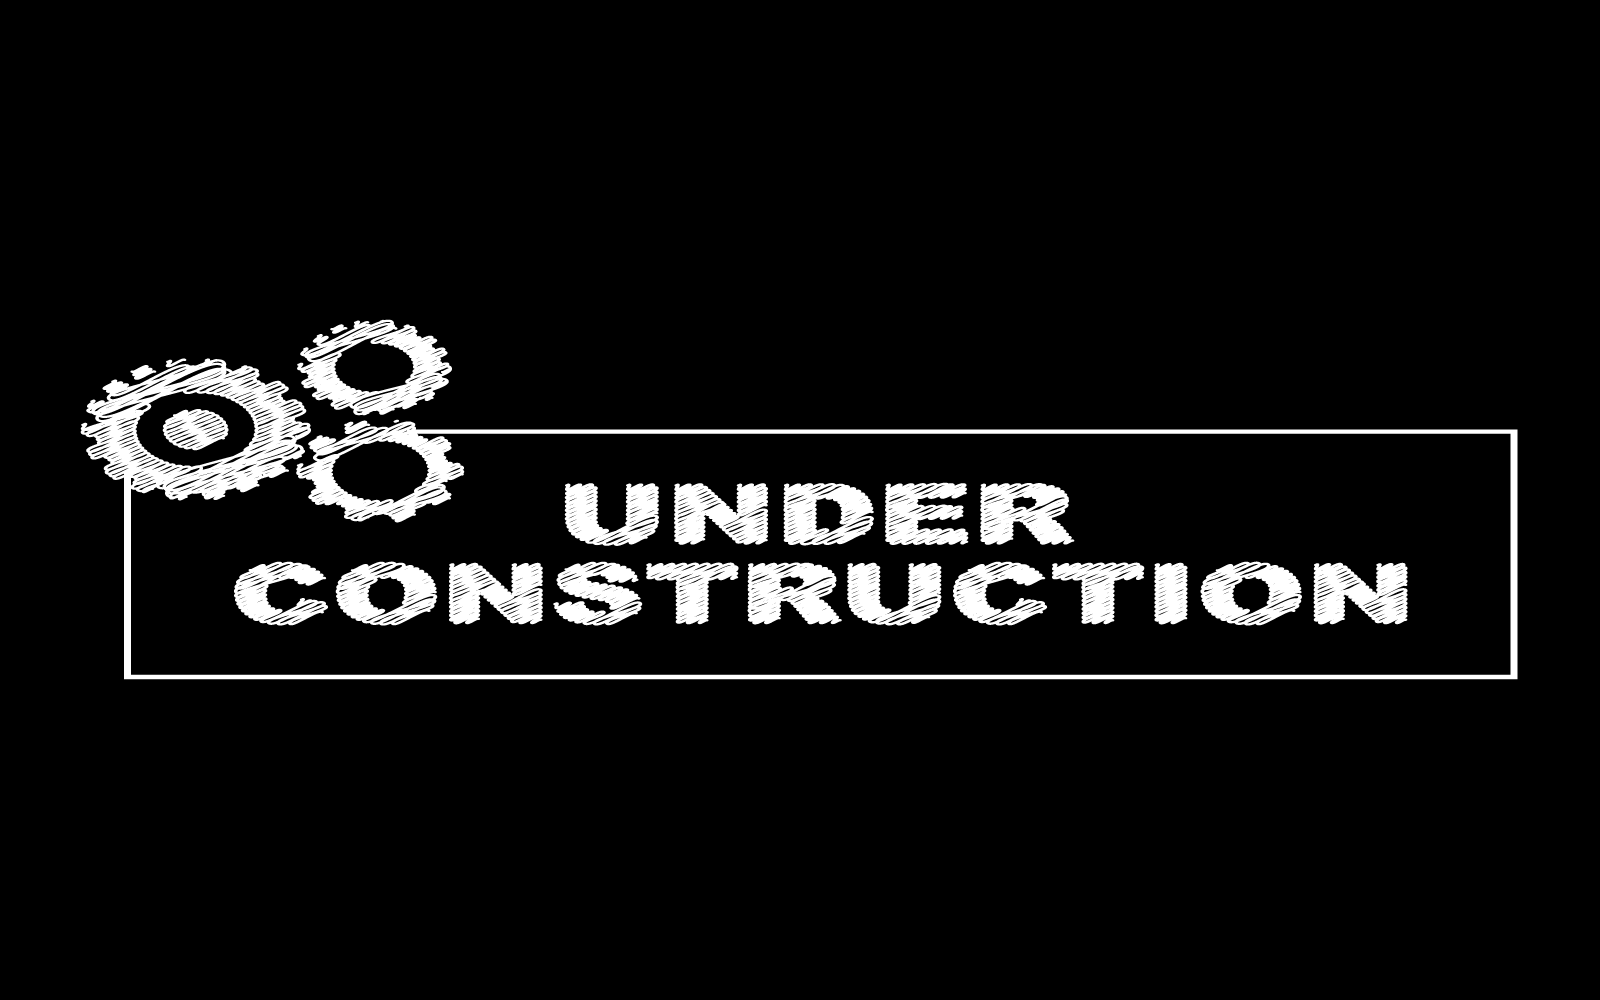 Under construction background with gears vector icon flat design